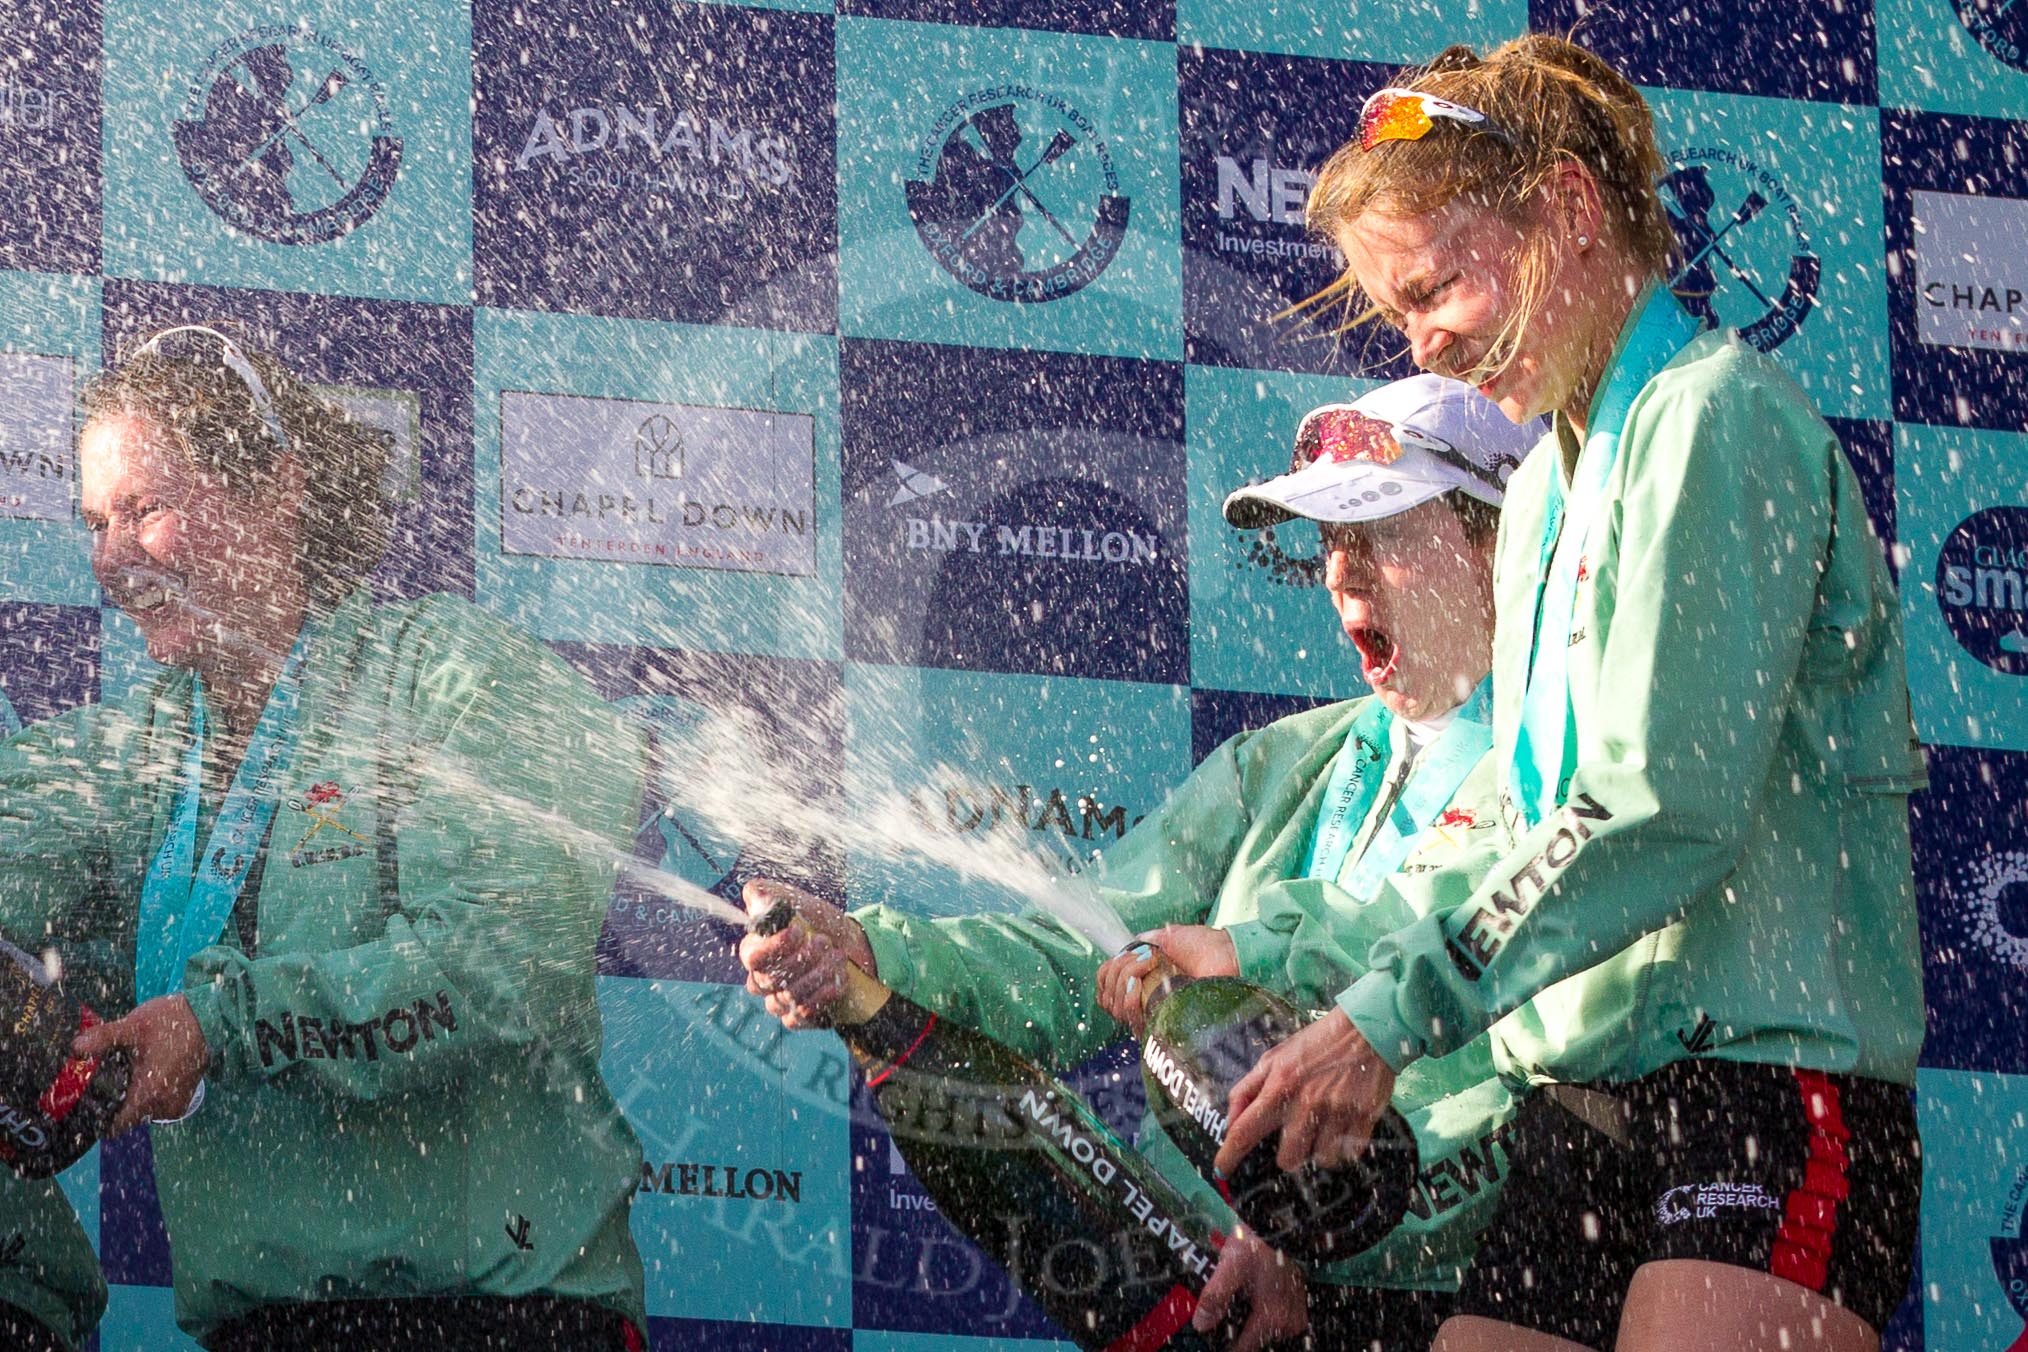 The Boat Race season 2017 -  The Cancer Research Women's Boat Race: CUWBC spraying the Champagne at the price giving - stroke Melissa Wilson, and cox Matthew Holland, and 4 seat Anna Dawson.
River Thames between Putney Bridge and Mortlake,
London SW15,

United Kingdom,
on 02 April 2017 at 17:13, image #268